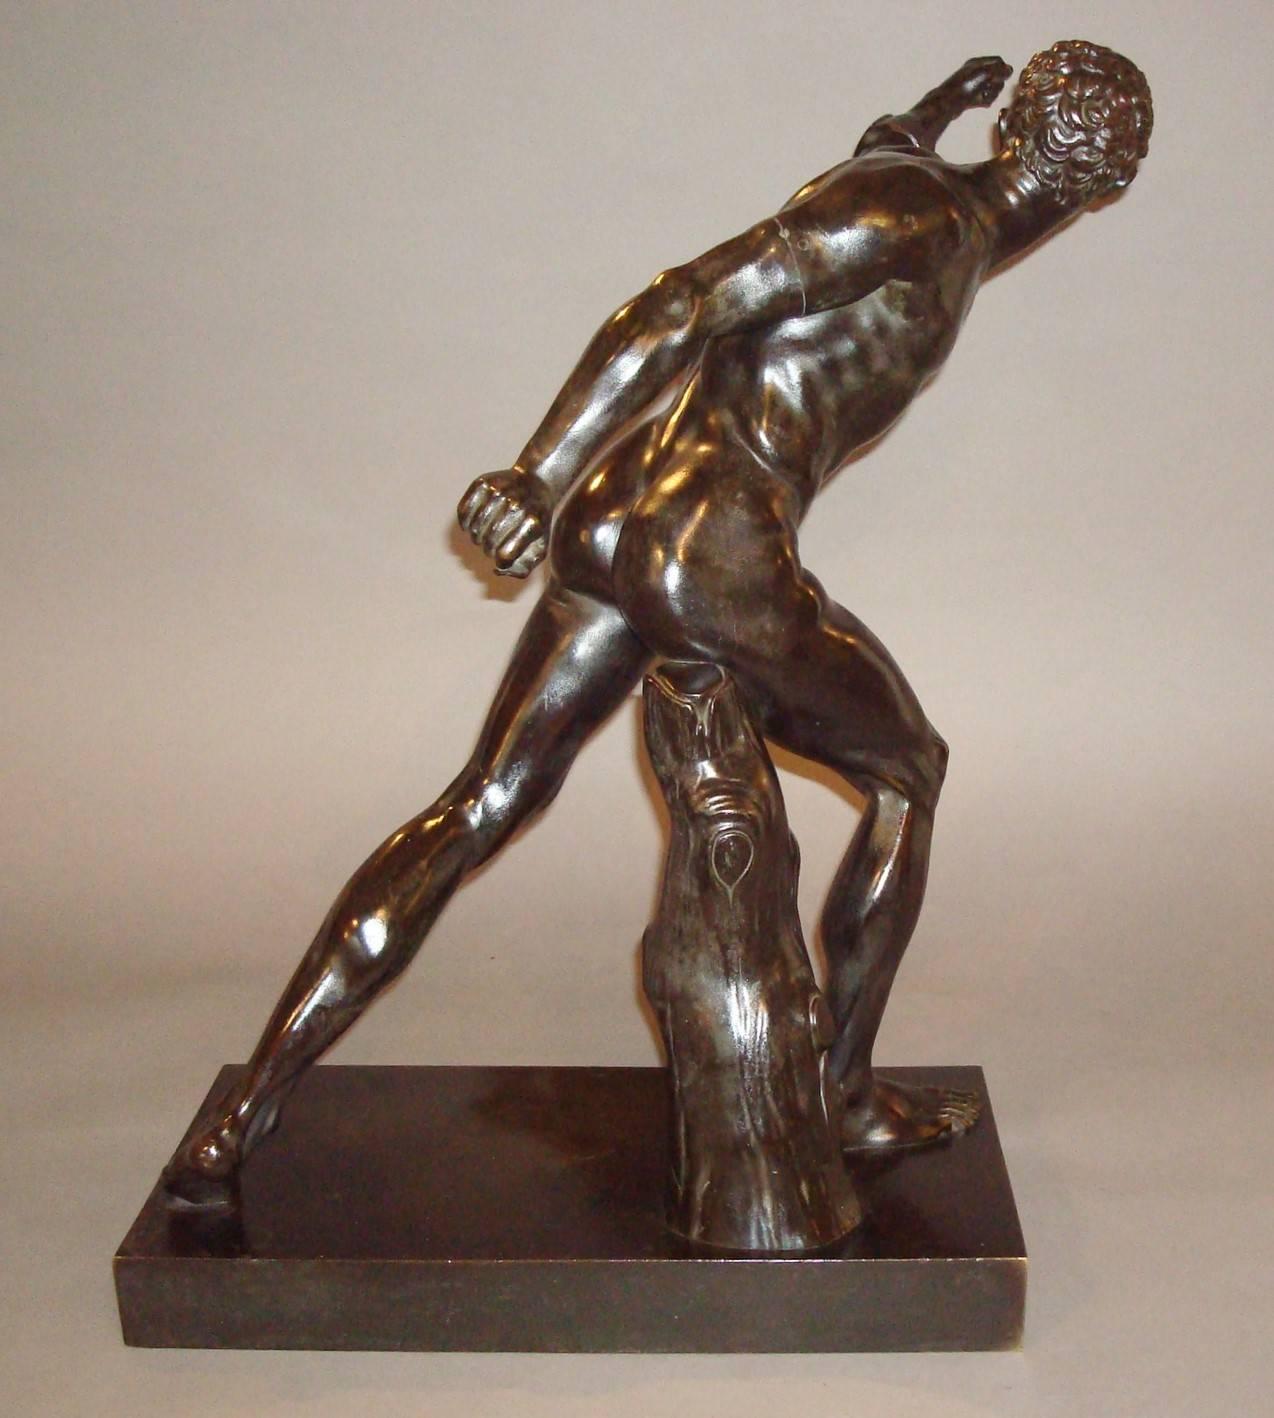 Polished Grand Tour Classical Bronze of Borghese Gladiator of Large Proportions